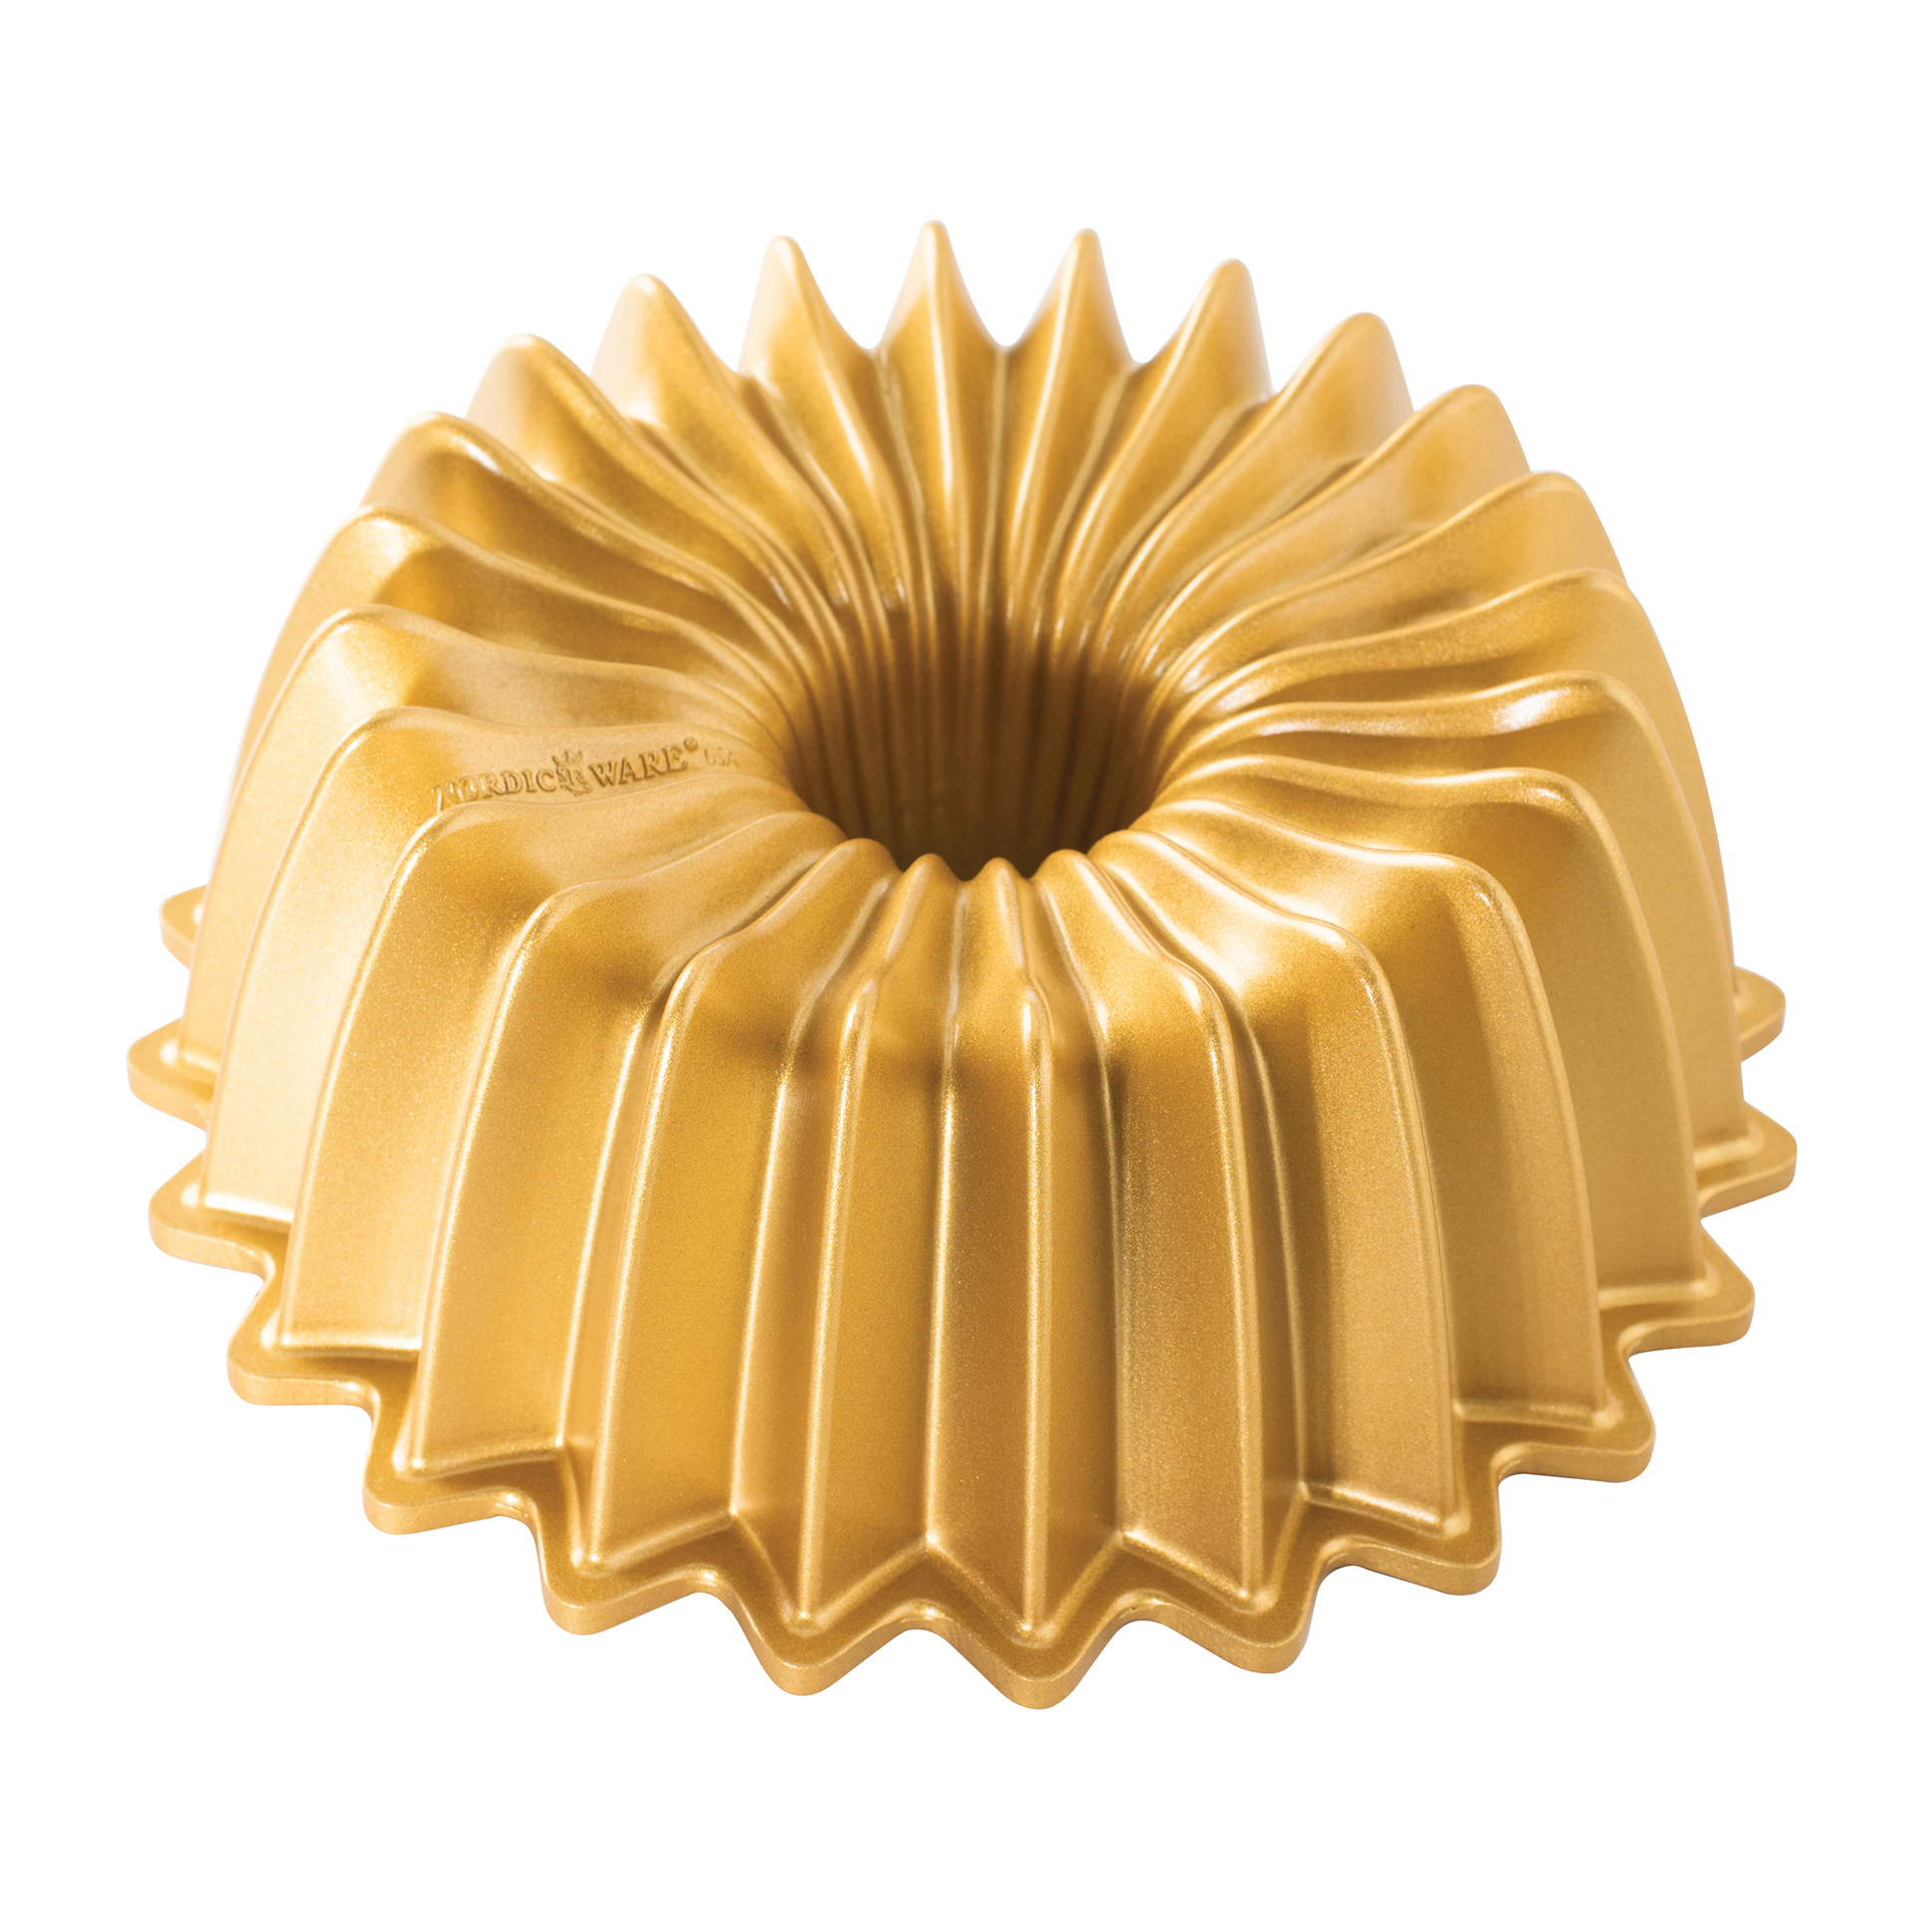  Nordic Ware Formed Bundt Pan, 12-Cup, Red: Home & Kitchen